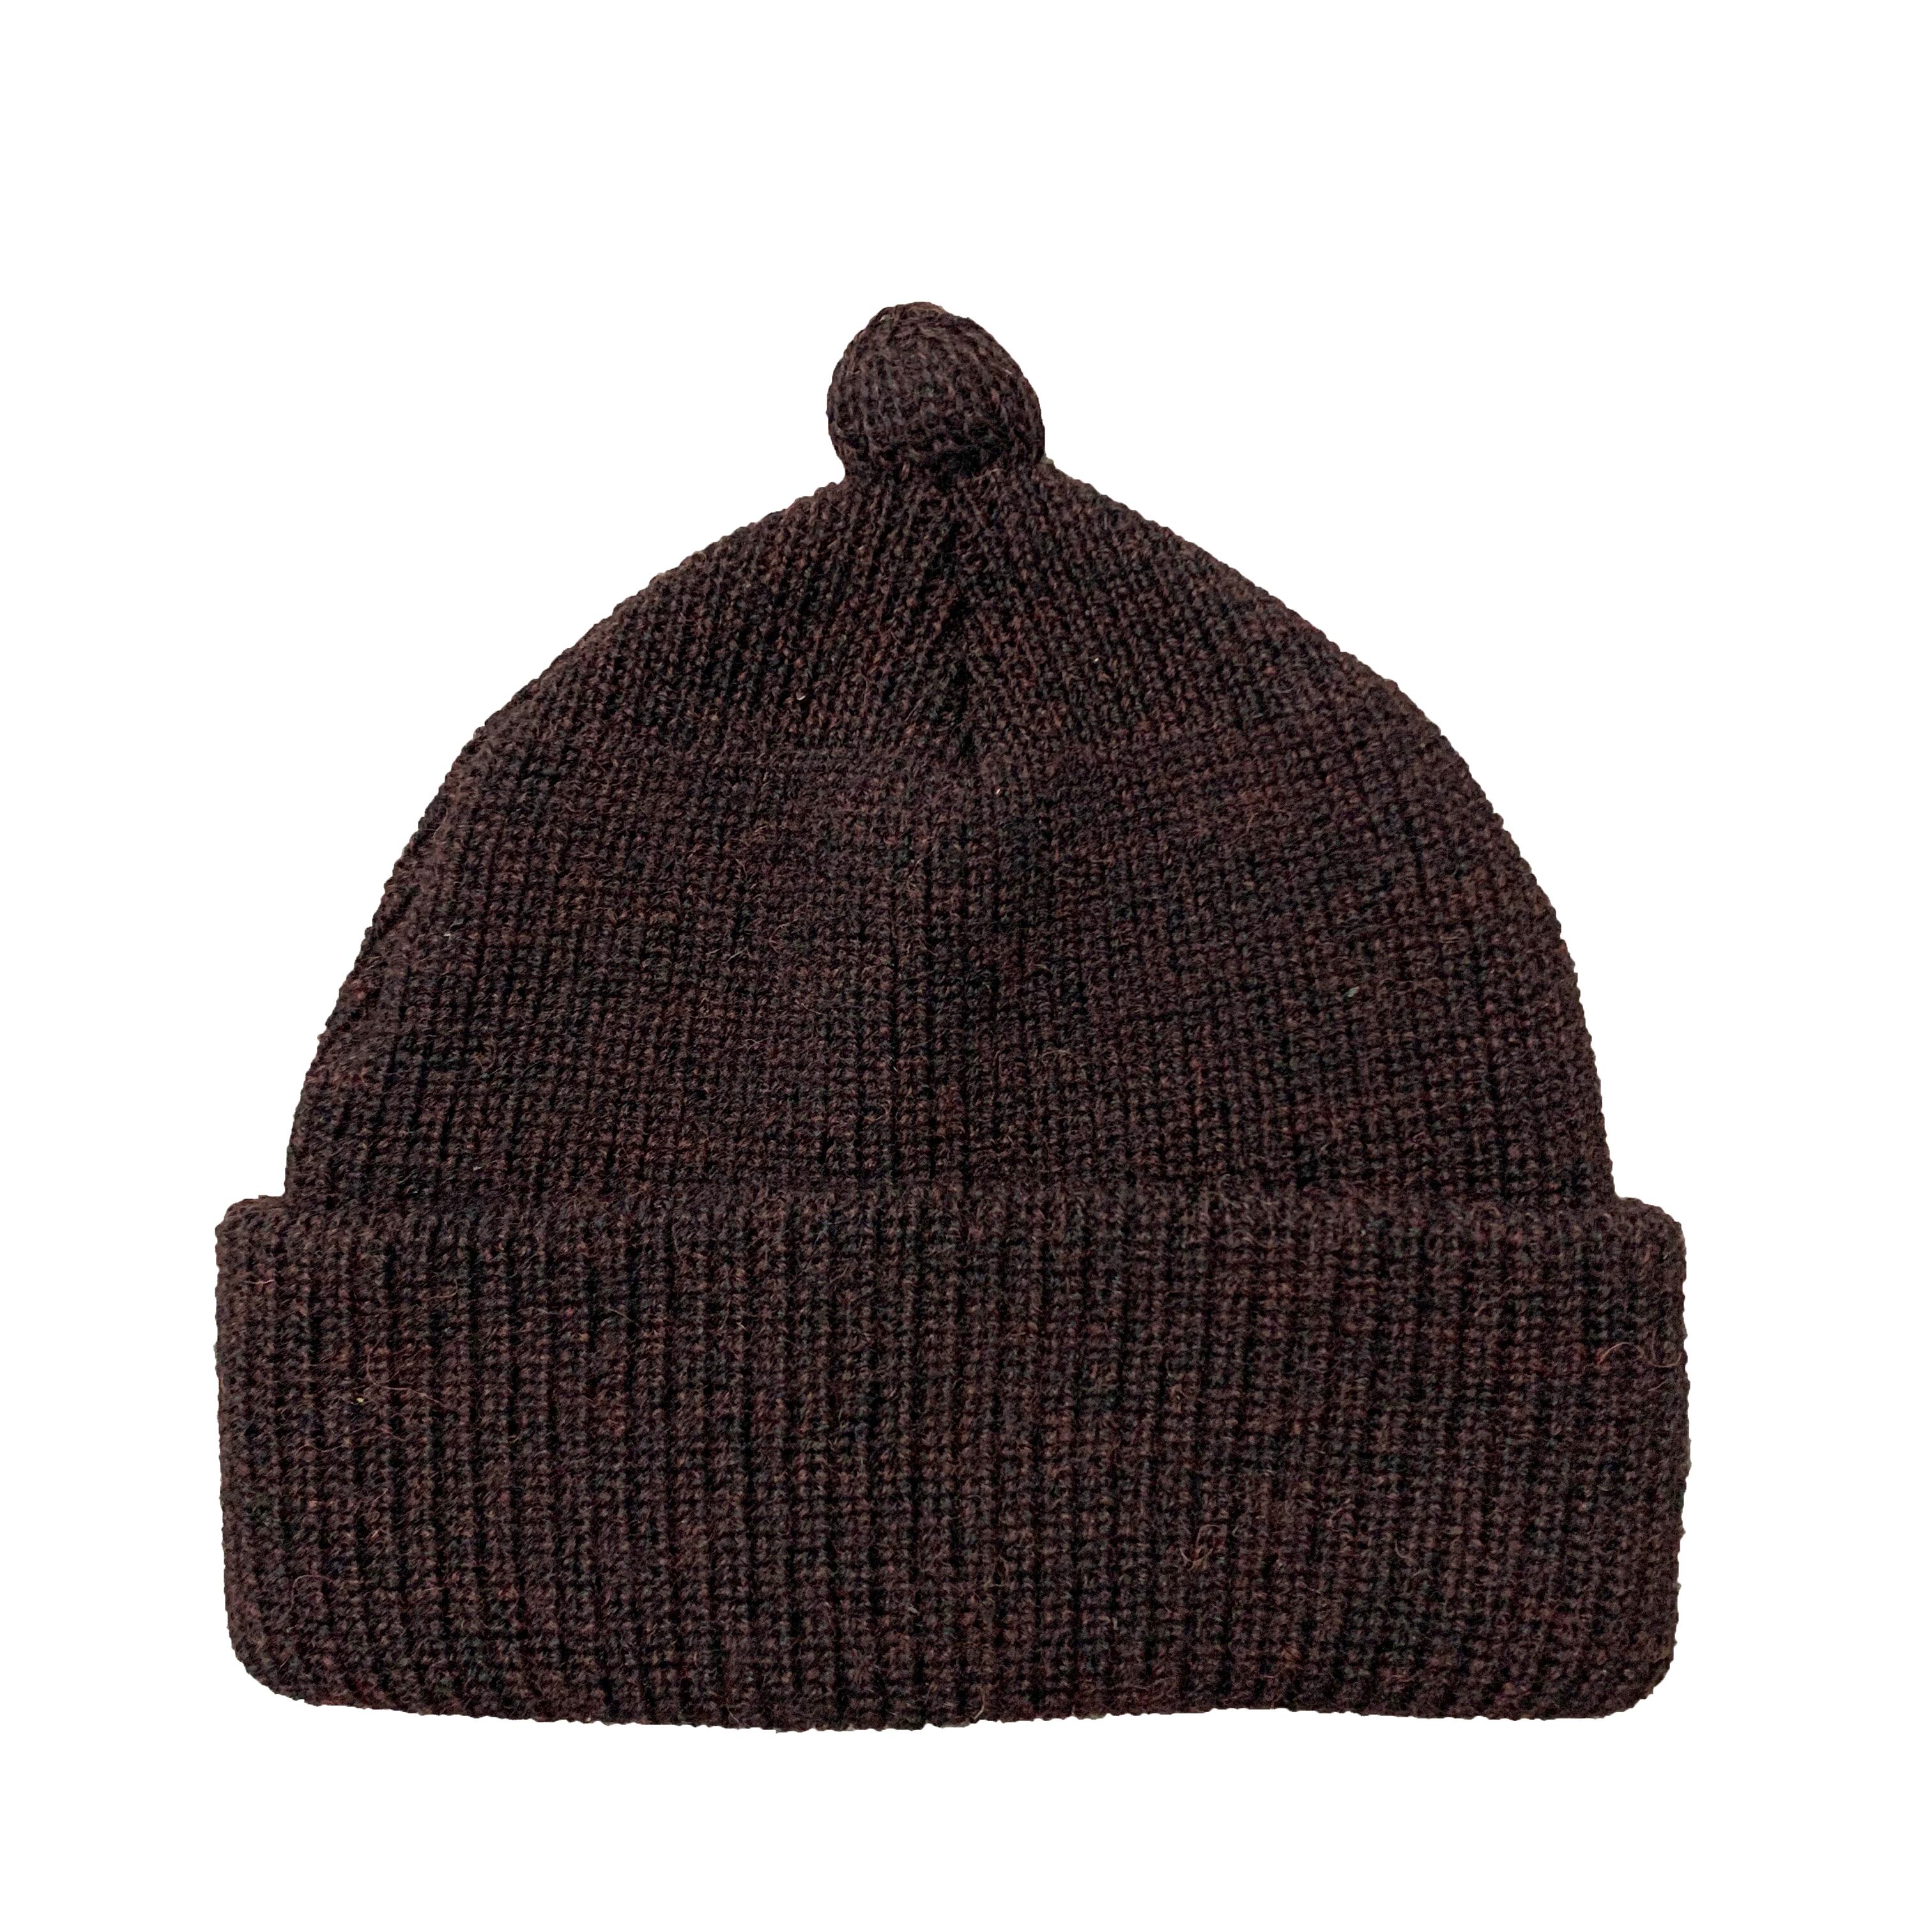 NOROLL / GERMINATE SOLID BEANIE -WINE- | THE NEWAGE CLUB powered by BASE